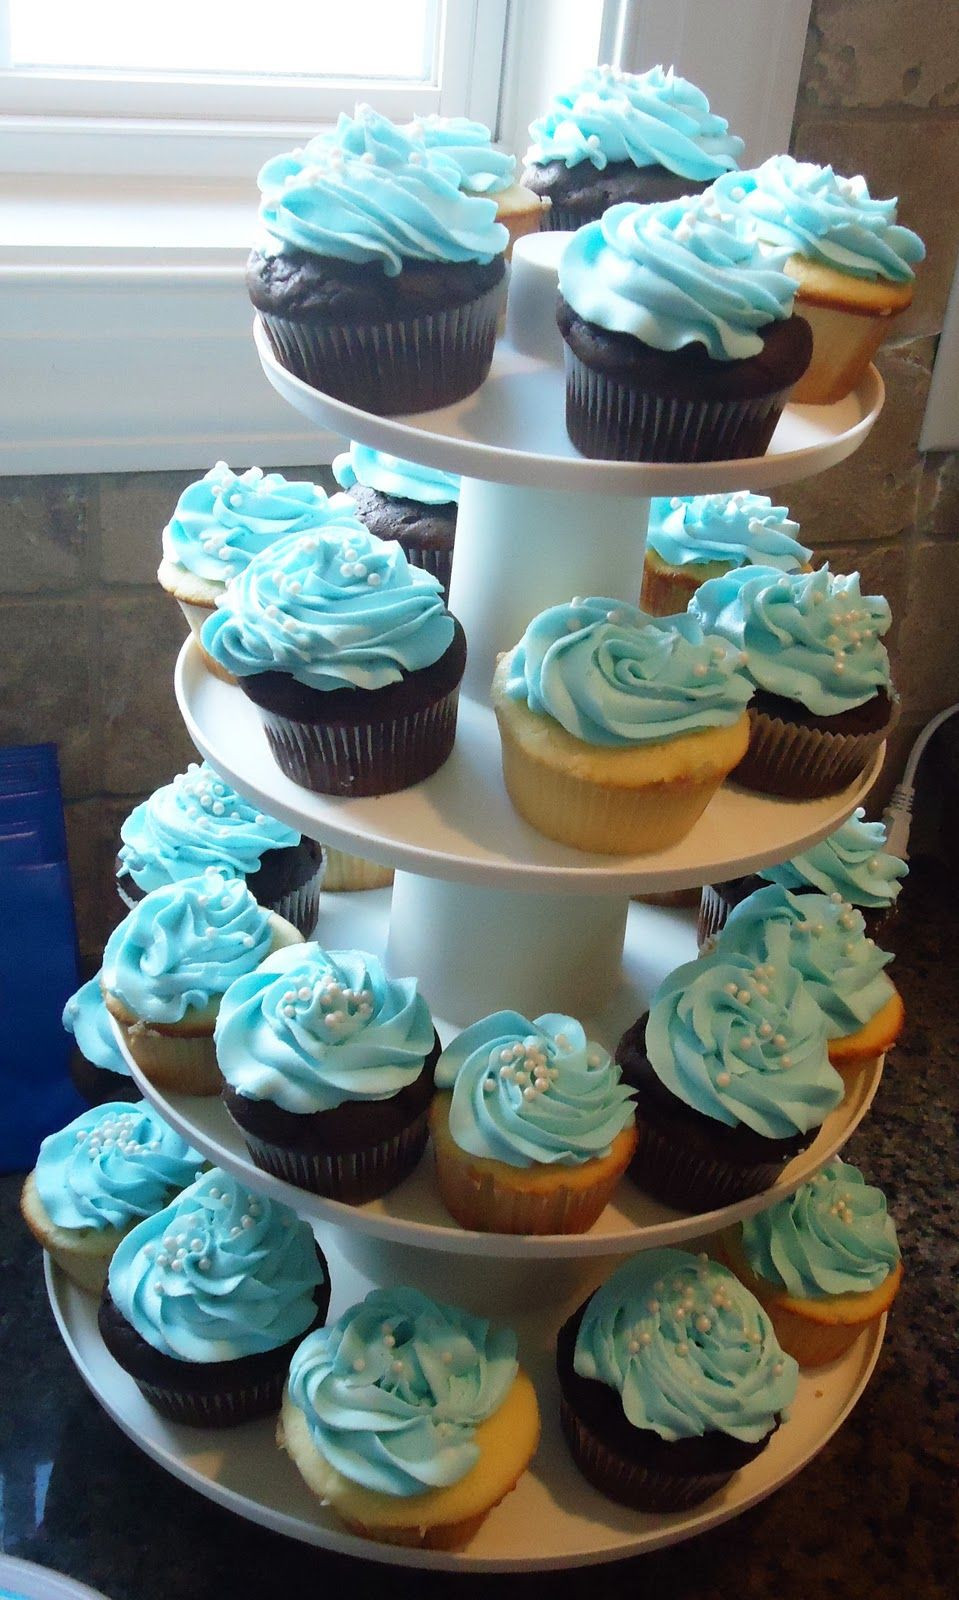 Baby Boy Cupcake Decorating Ideas
 baby shower cupcakes for boys